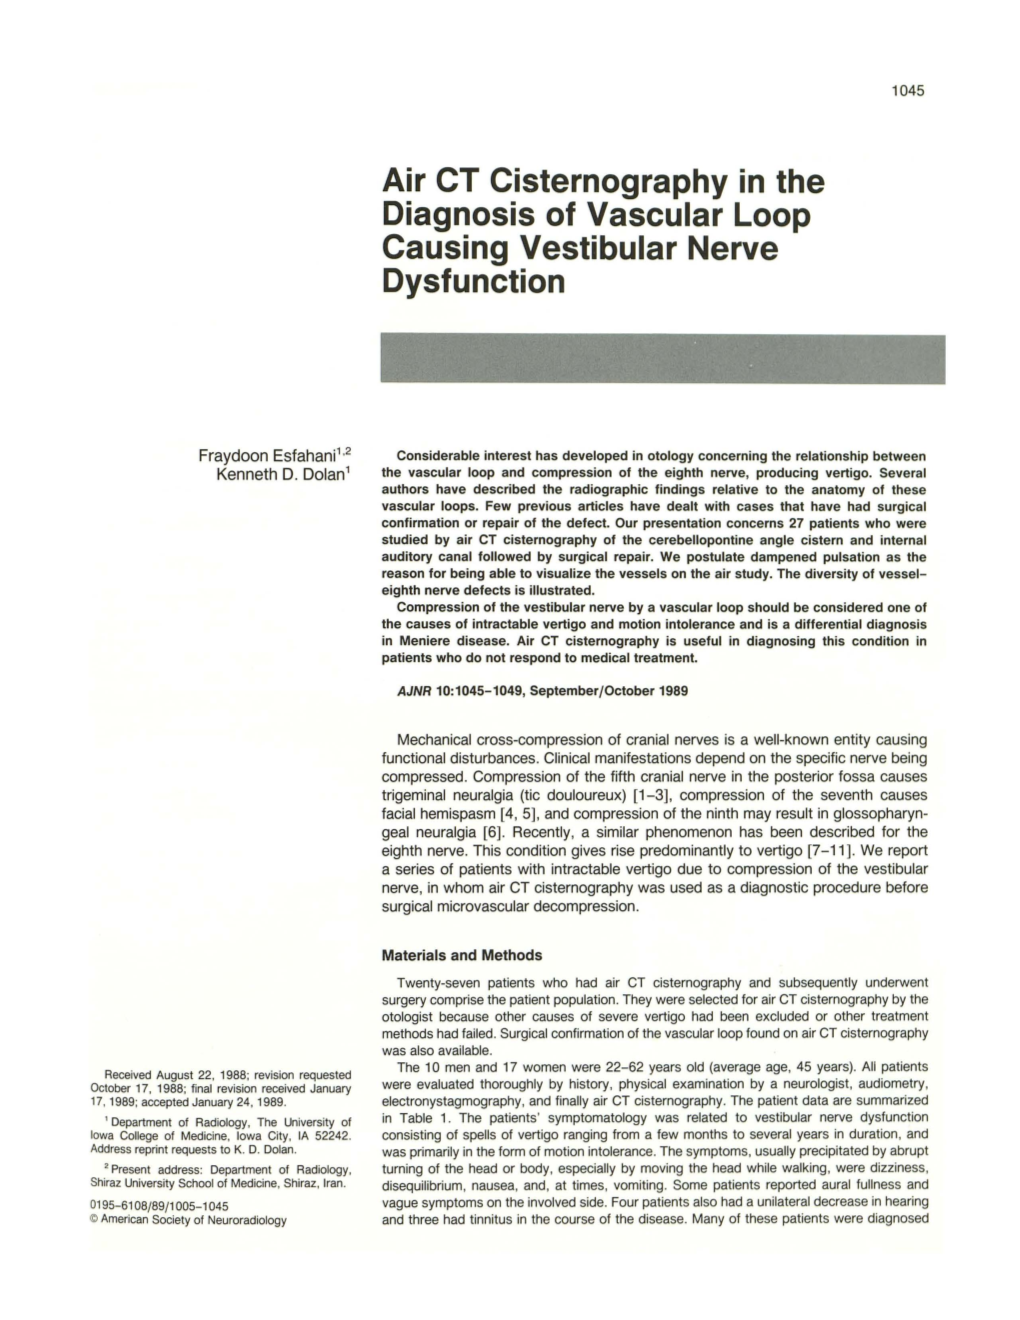 Air CT Cisternography in the Diagnosis of Vascular Loop Causing Vestibular Nerve Dysfunction